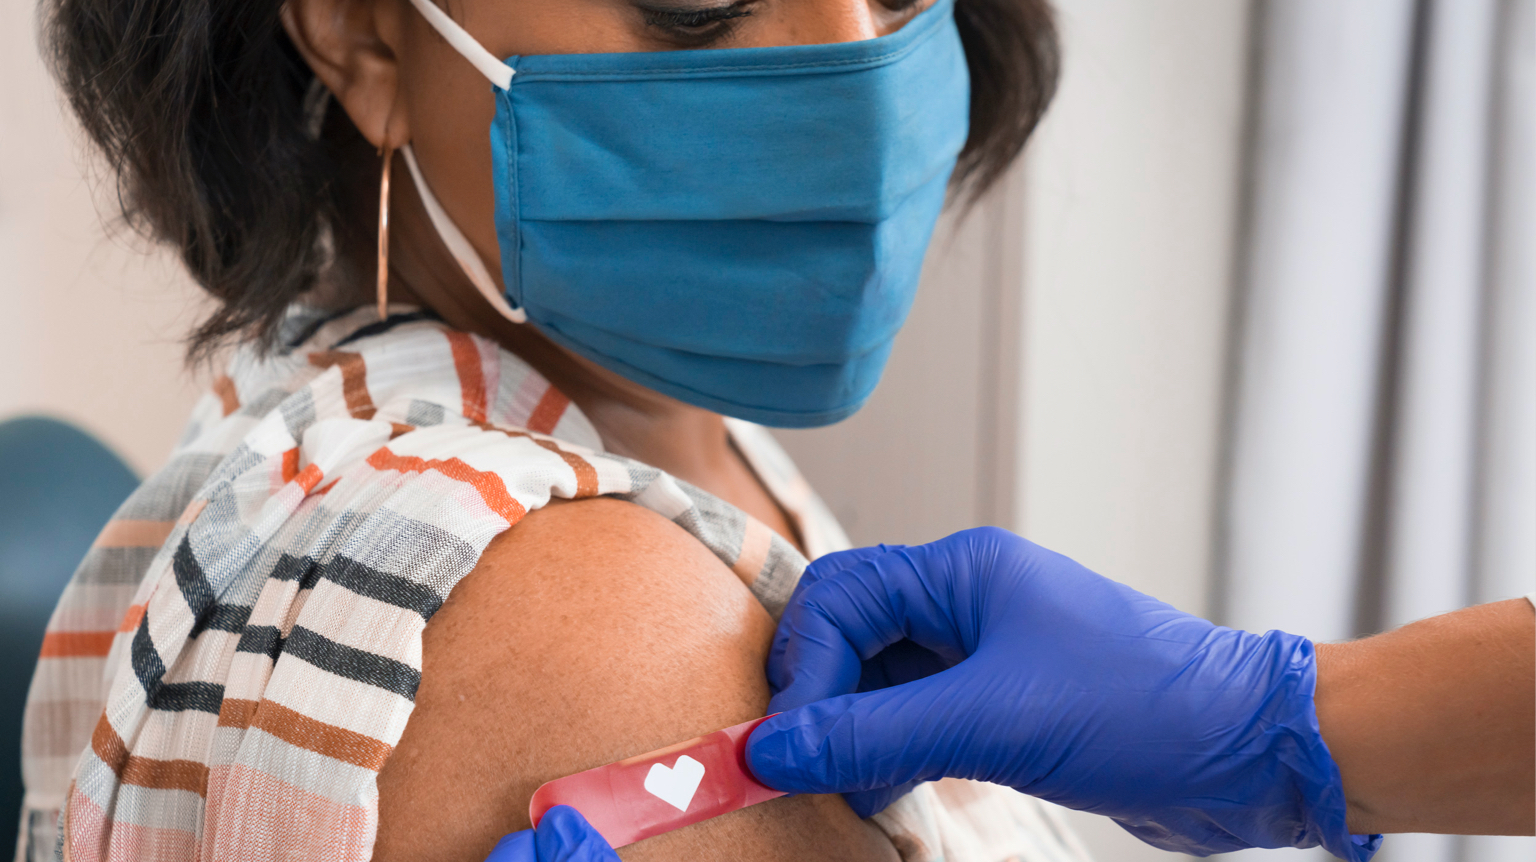 Photograph of a female patient having a CVS bandage applied after receiving vaccine.